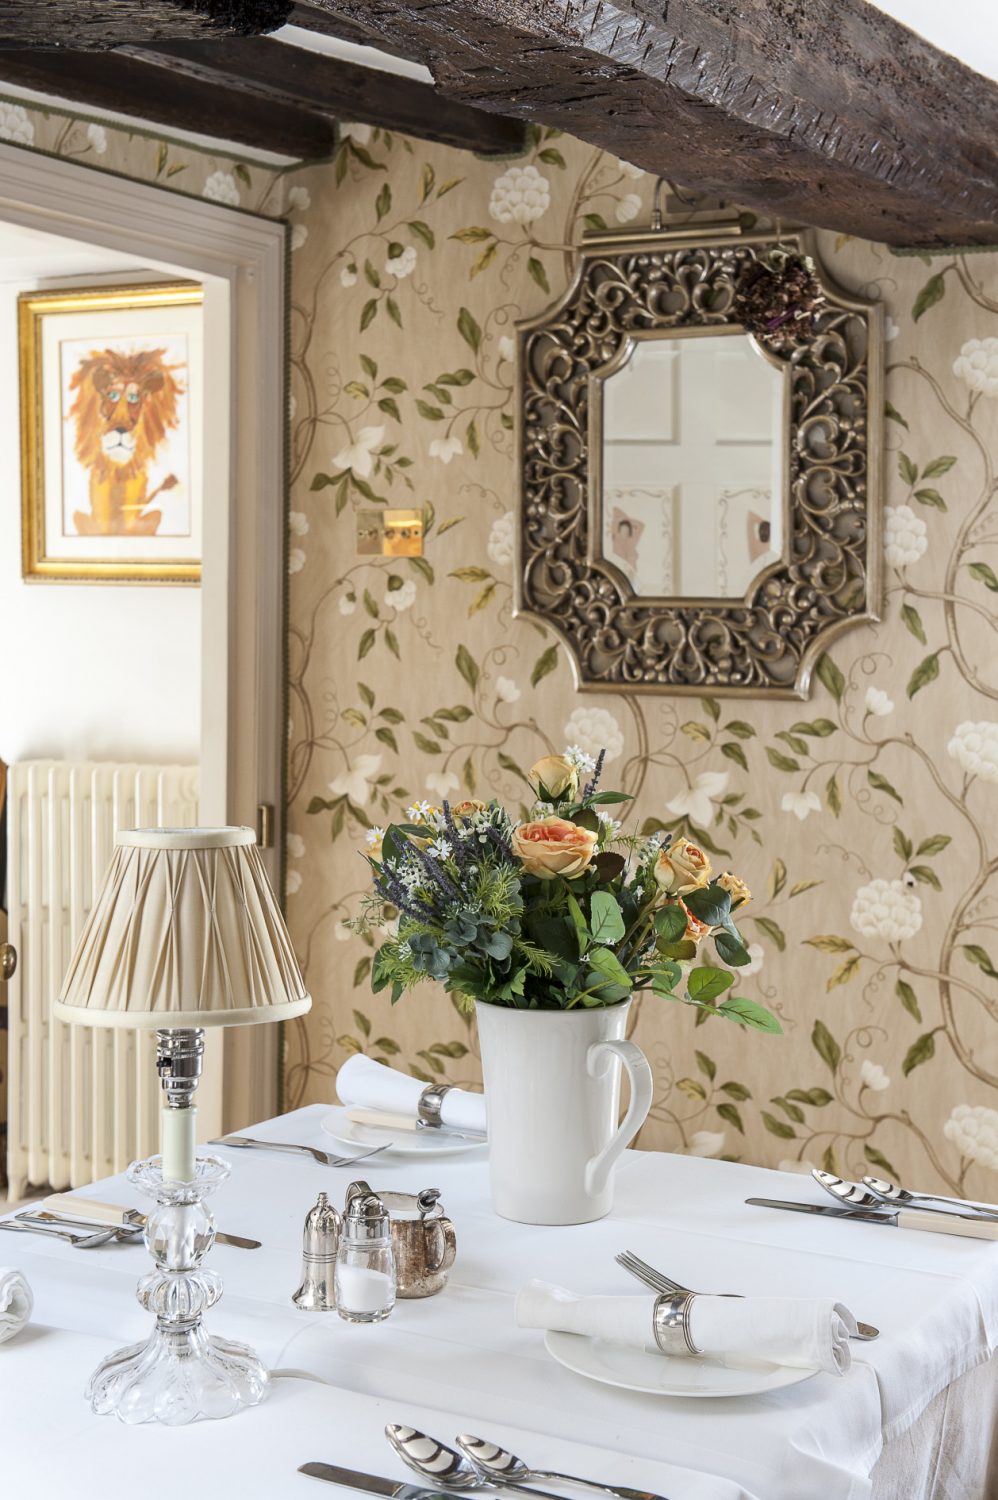 The dining room is used principally as a breakfast room. Nina has varnished the Colefax & Fowler ‘Snowtree’ wallpaper to give it the appearance of silk